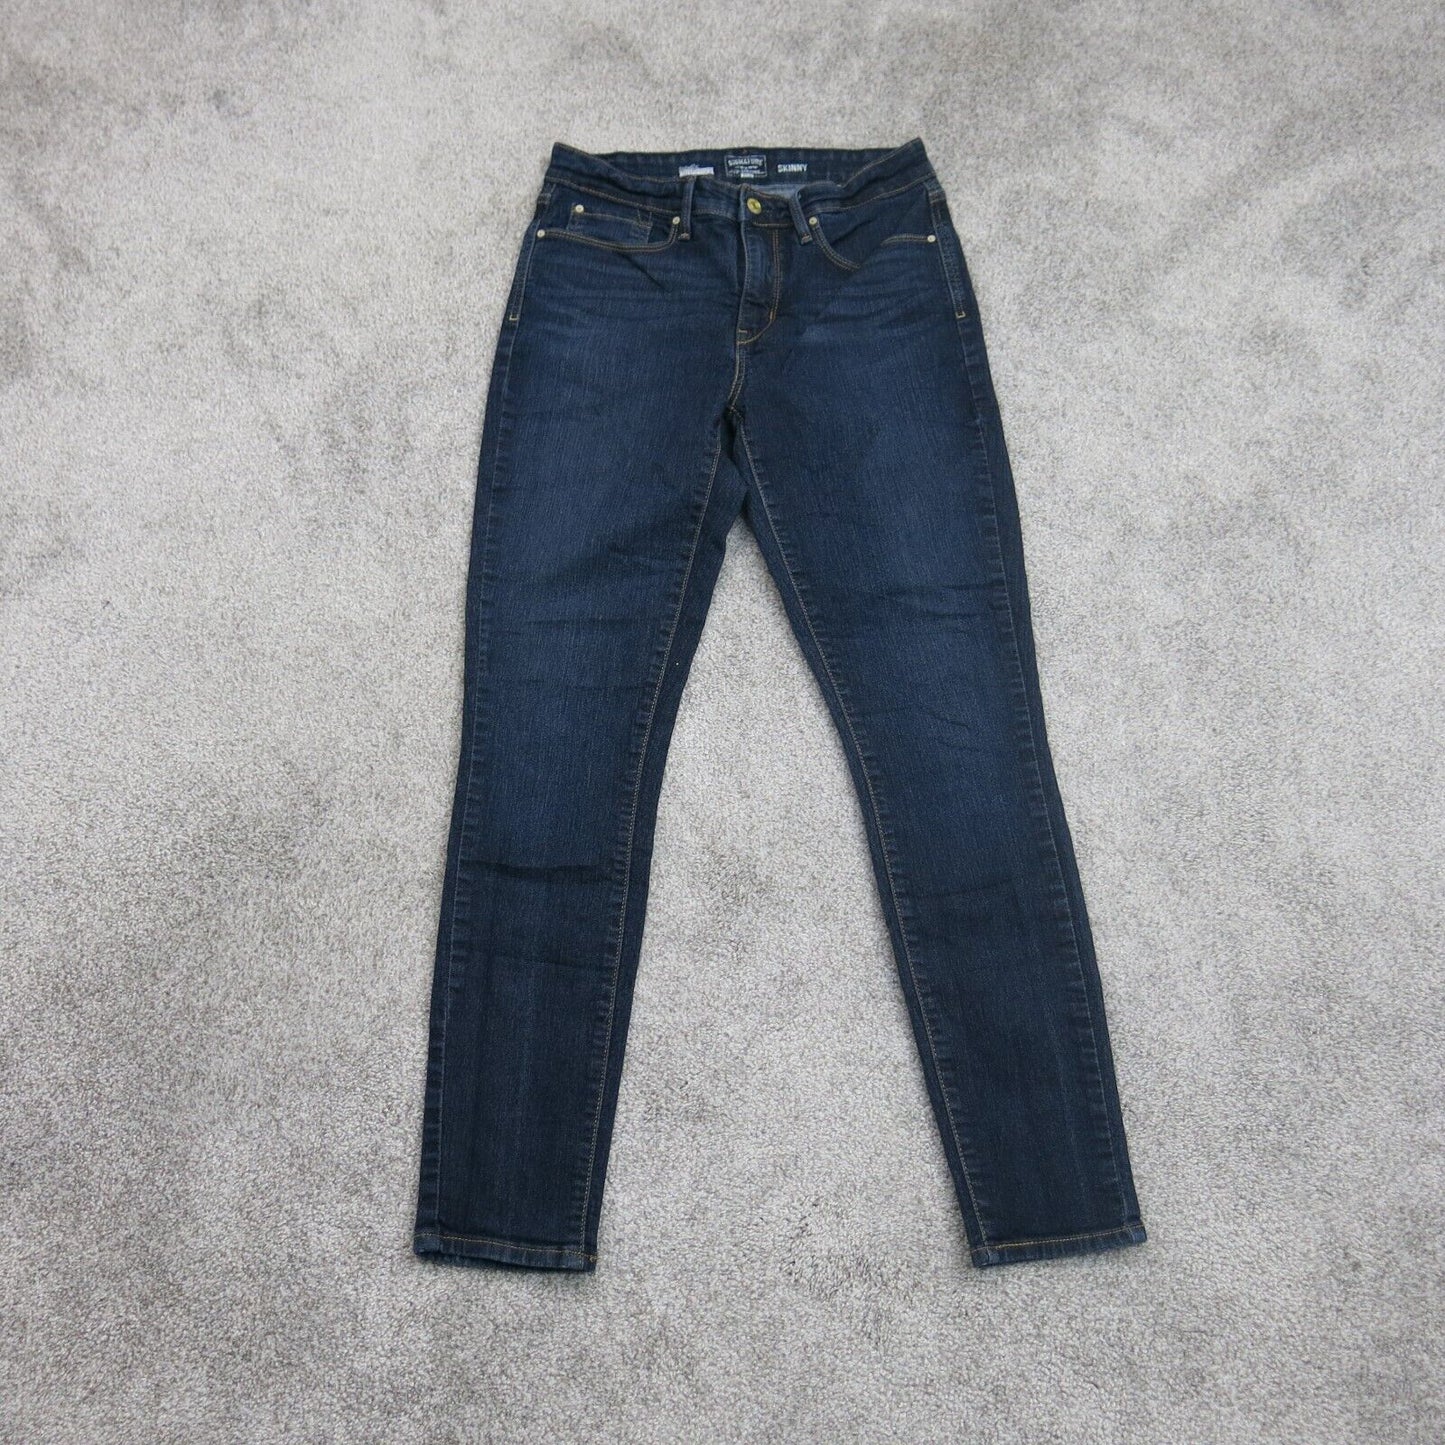 Signature By Levis Strauss Womens Skinny Leg Jeans Mid Rise Blue Size W30 X L 34